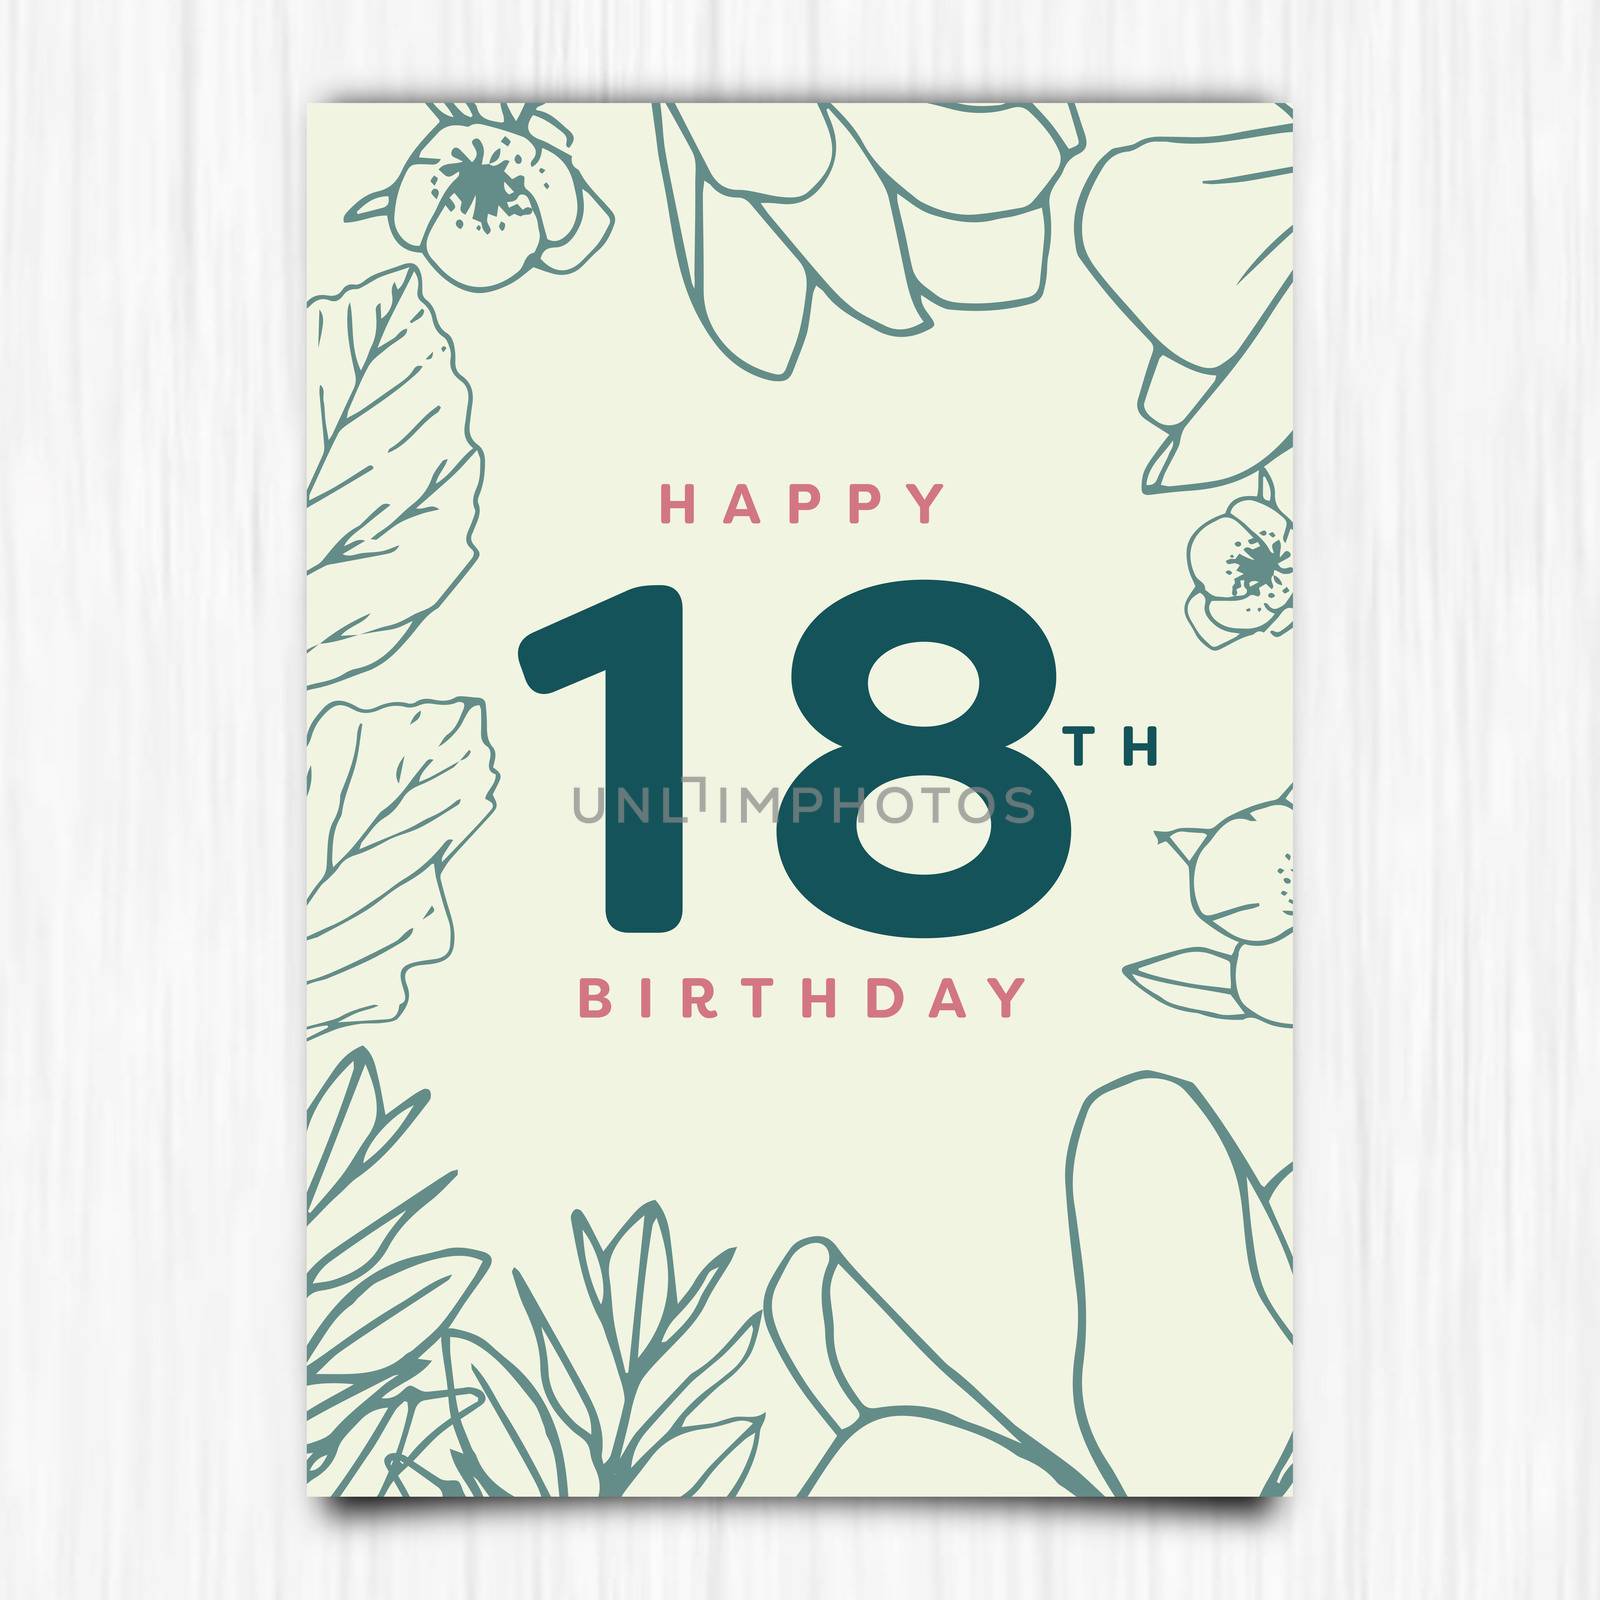 Vector icon of happy birthday 18th years greeting card with leaves decoration